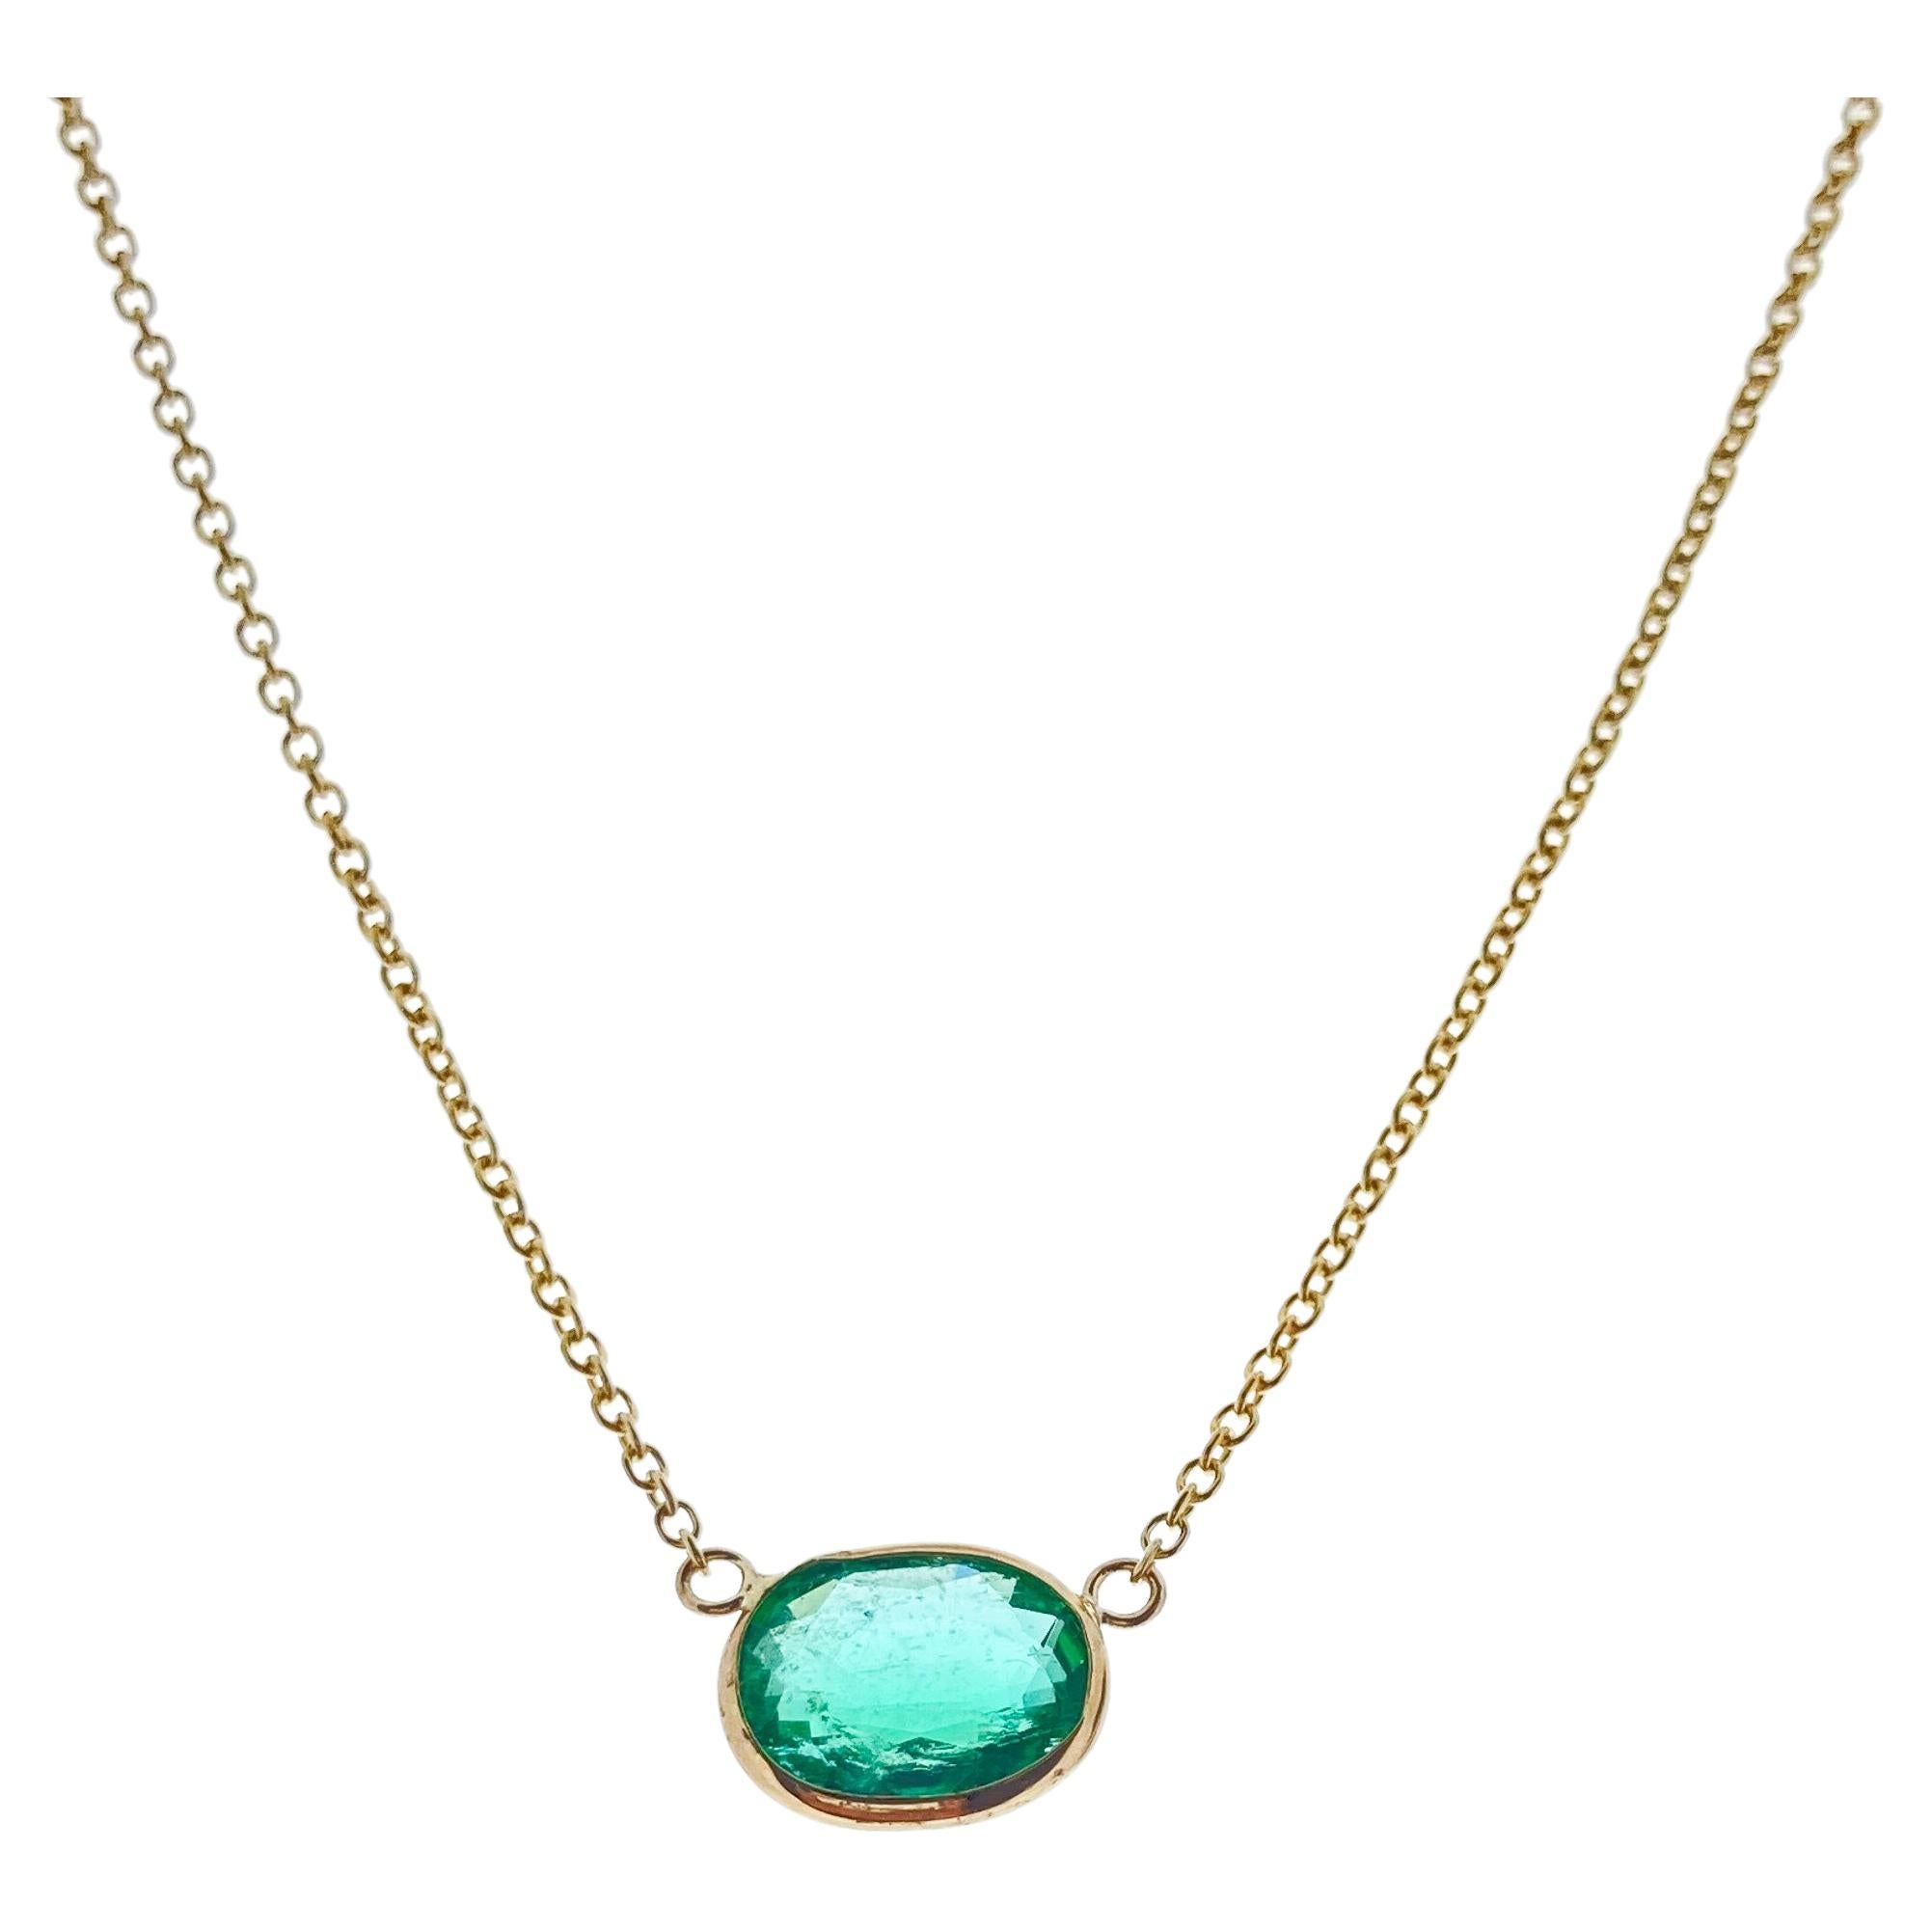 1.67 Carat Green Emerald Oval Cut Fashion Necklaces In 14K Yellow Gold